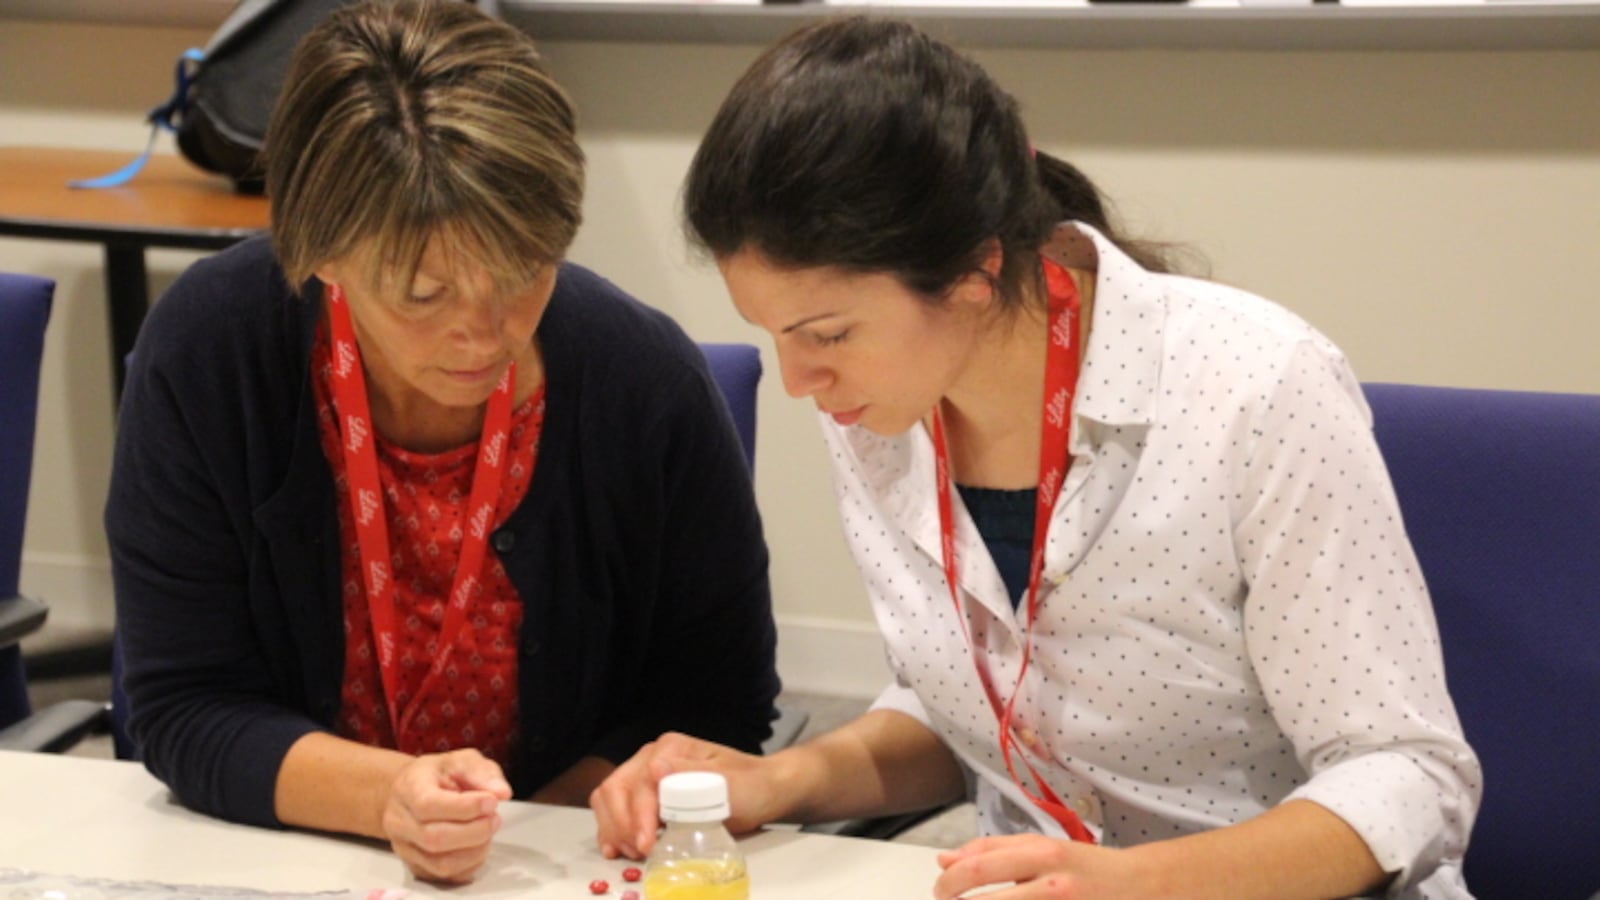 Teachers Paula Manchess (left) and Heidi Wilkinson (right) work to detect counterfeit medicines by creating a process to identify the correct color, shape, branding and purity of their samples.